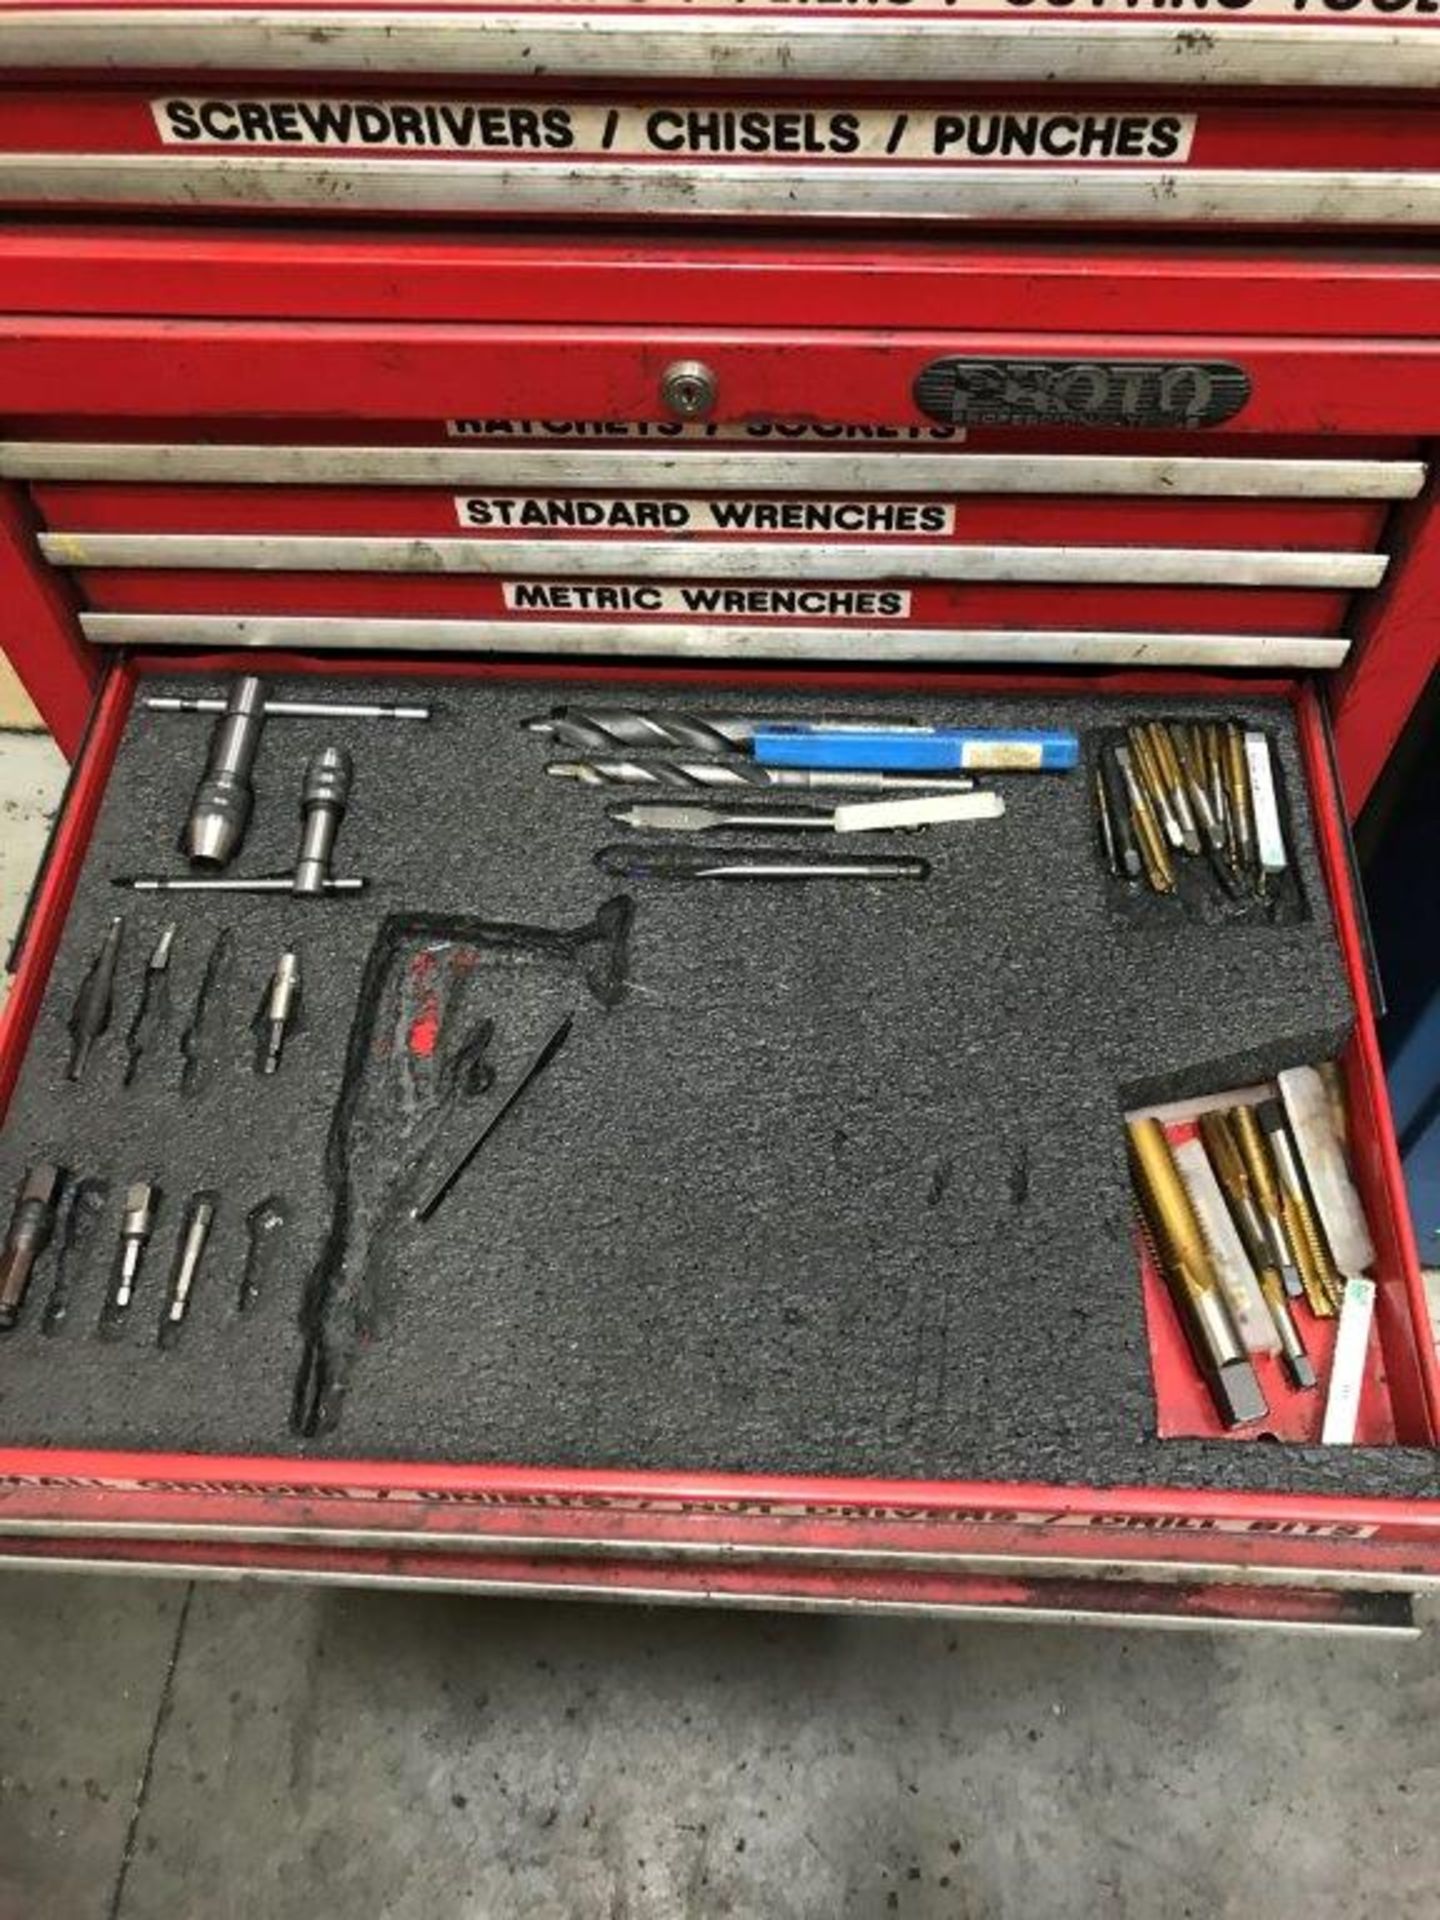 Proto (11) Drawer Mobile Tool Chest with Content of Assorted Hand Tools - Image 4 of 5